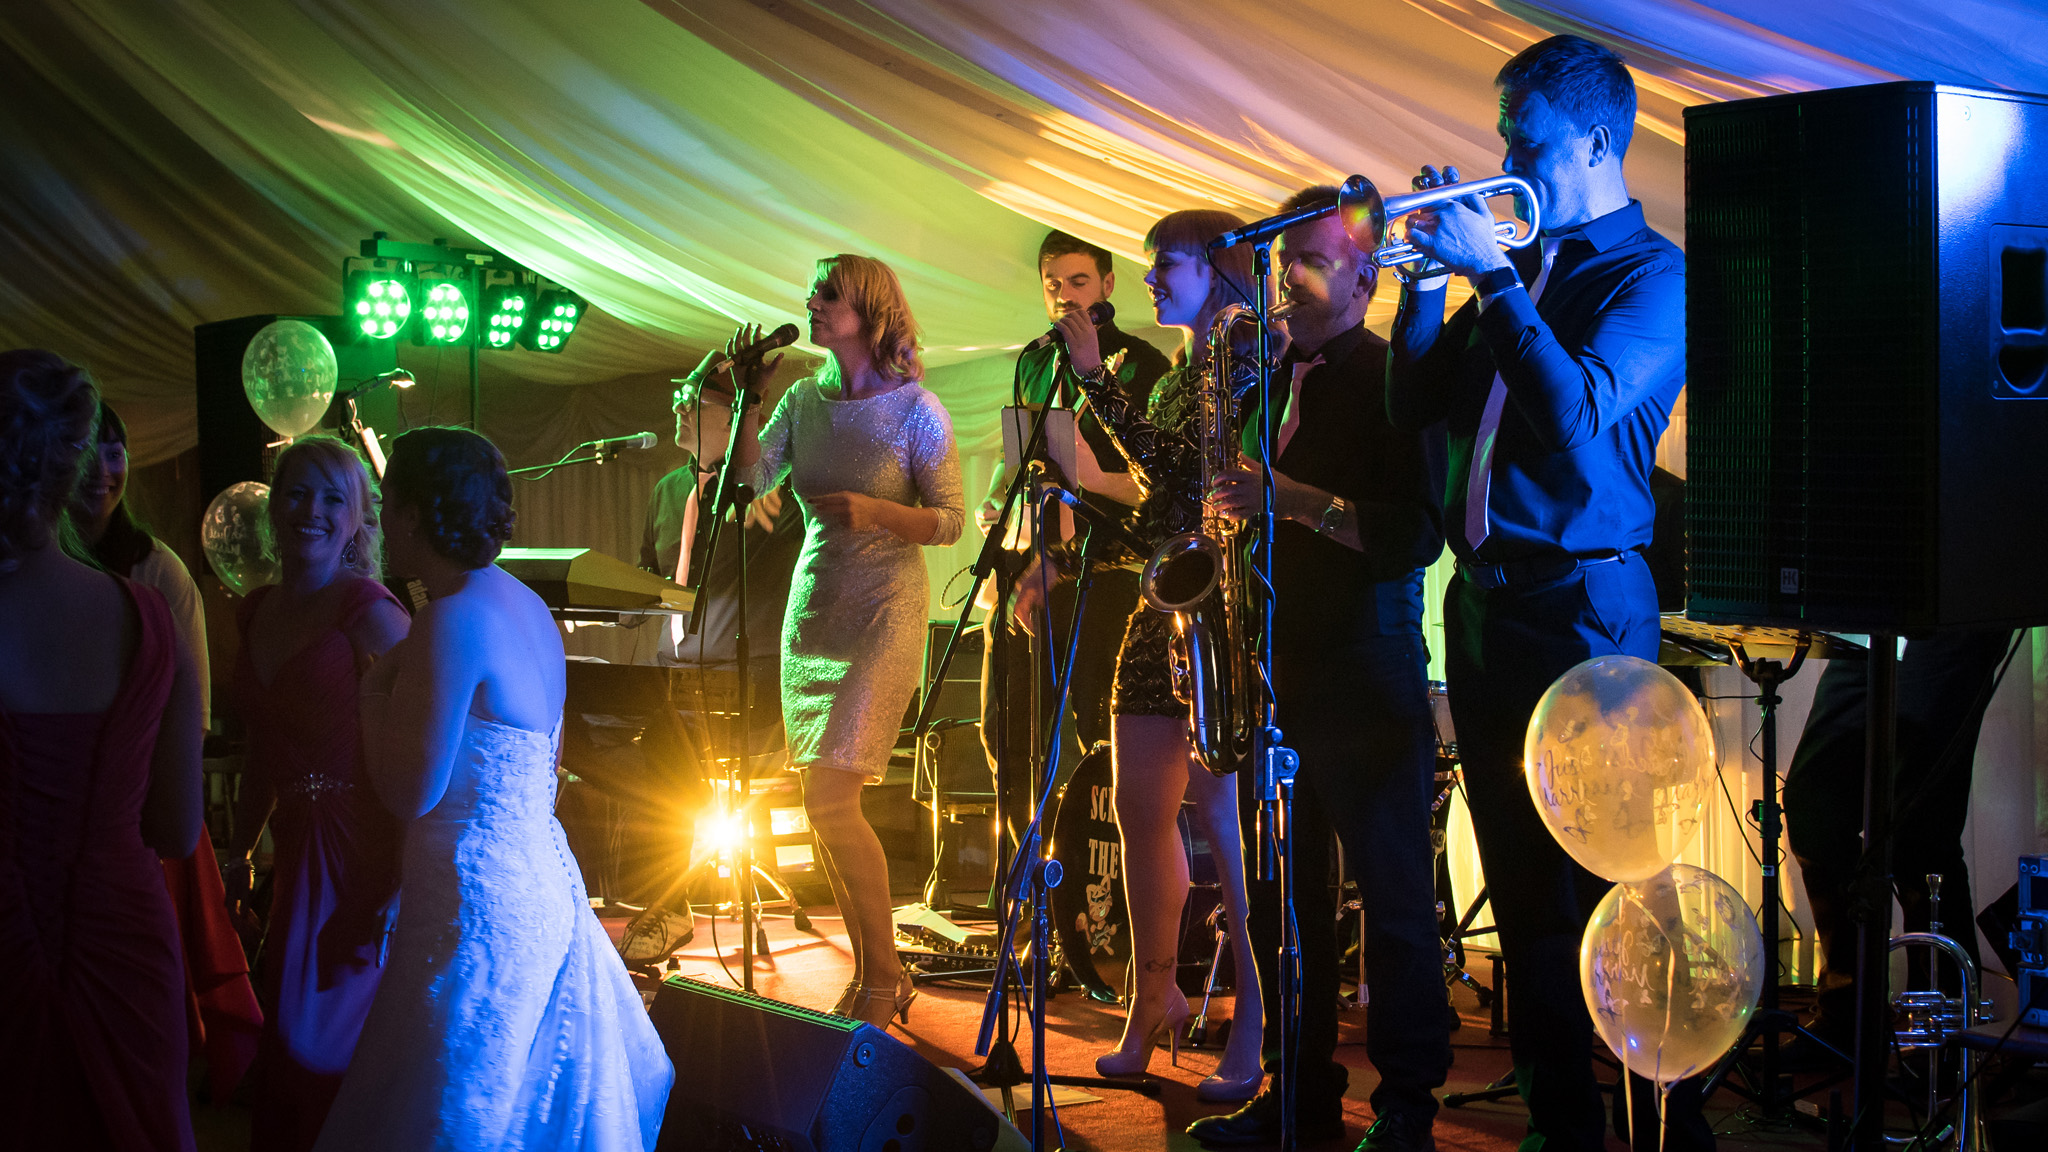 Dancing to the music of Scratch The Cat in a wedding marquee.